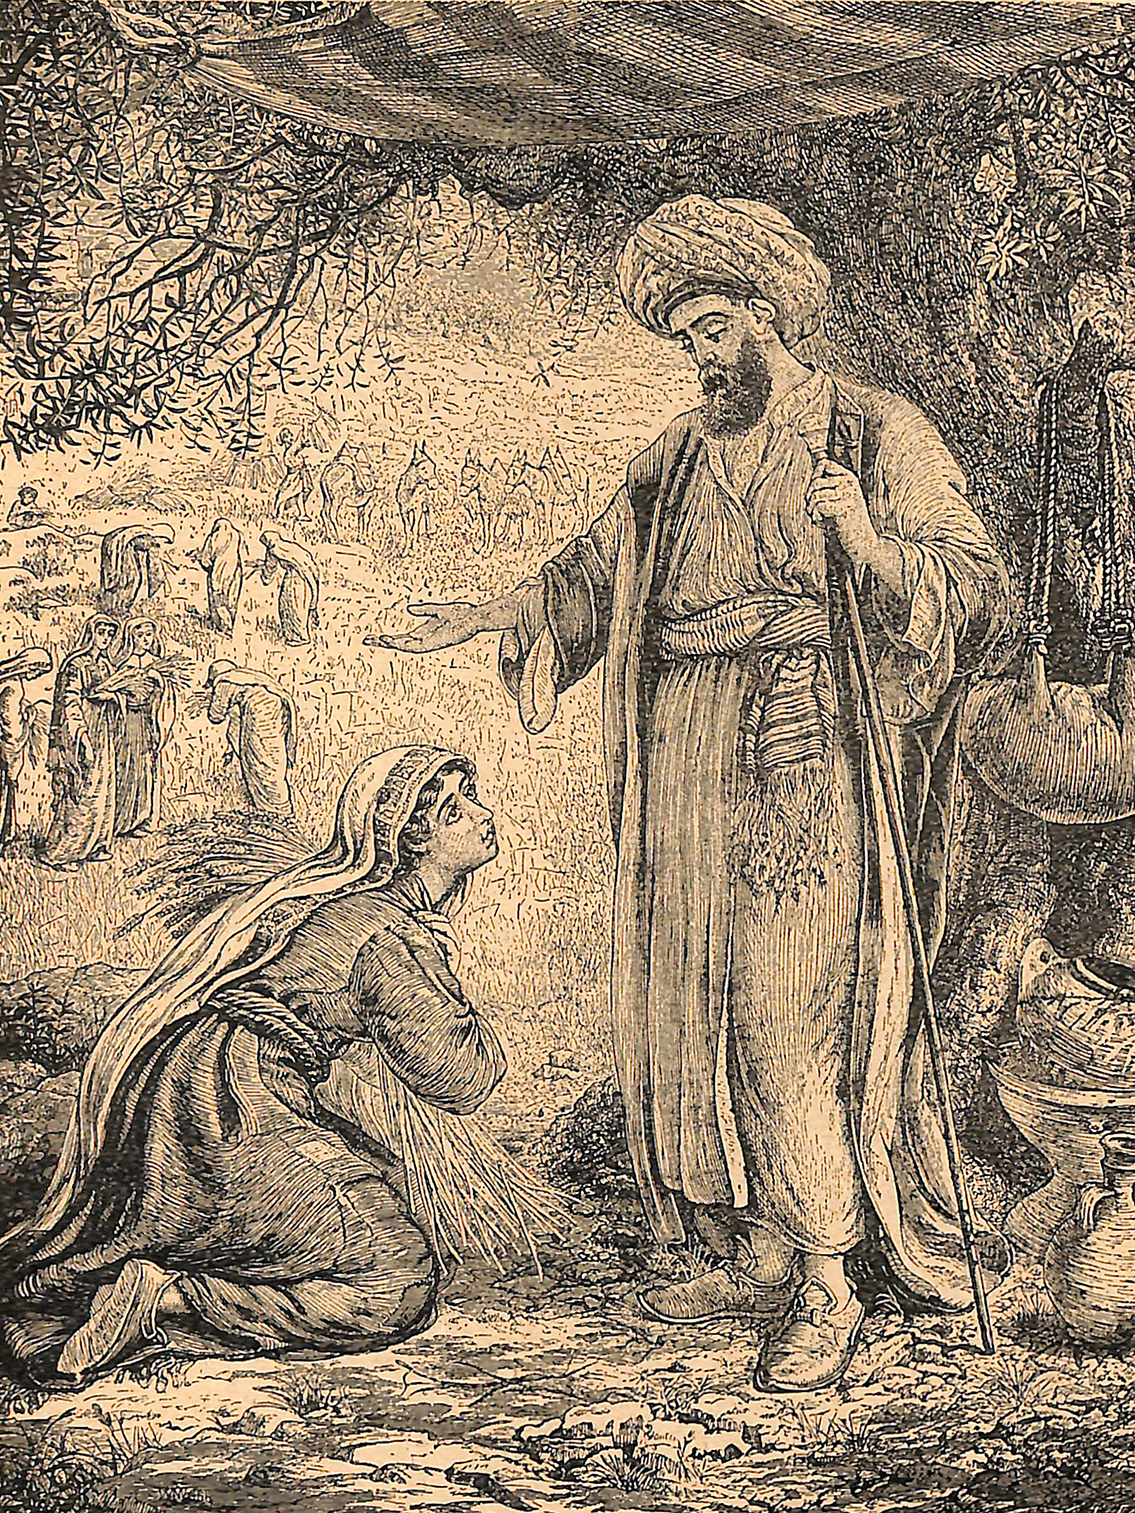 Boaz Showing Kindness To Ruth